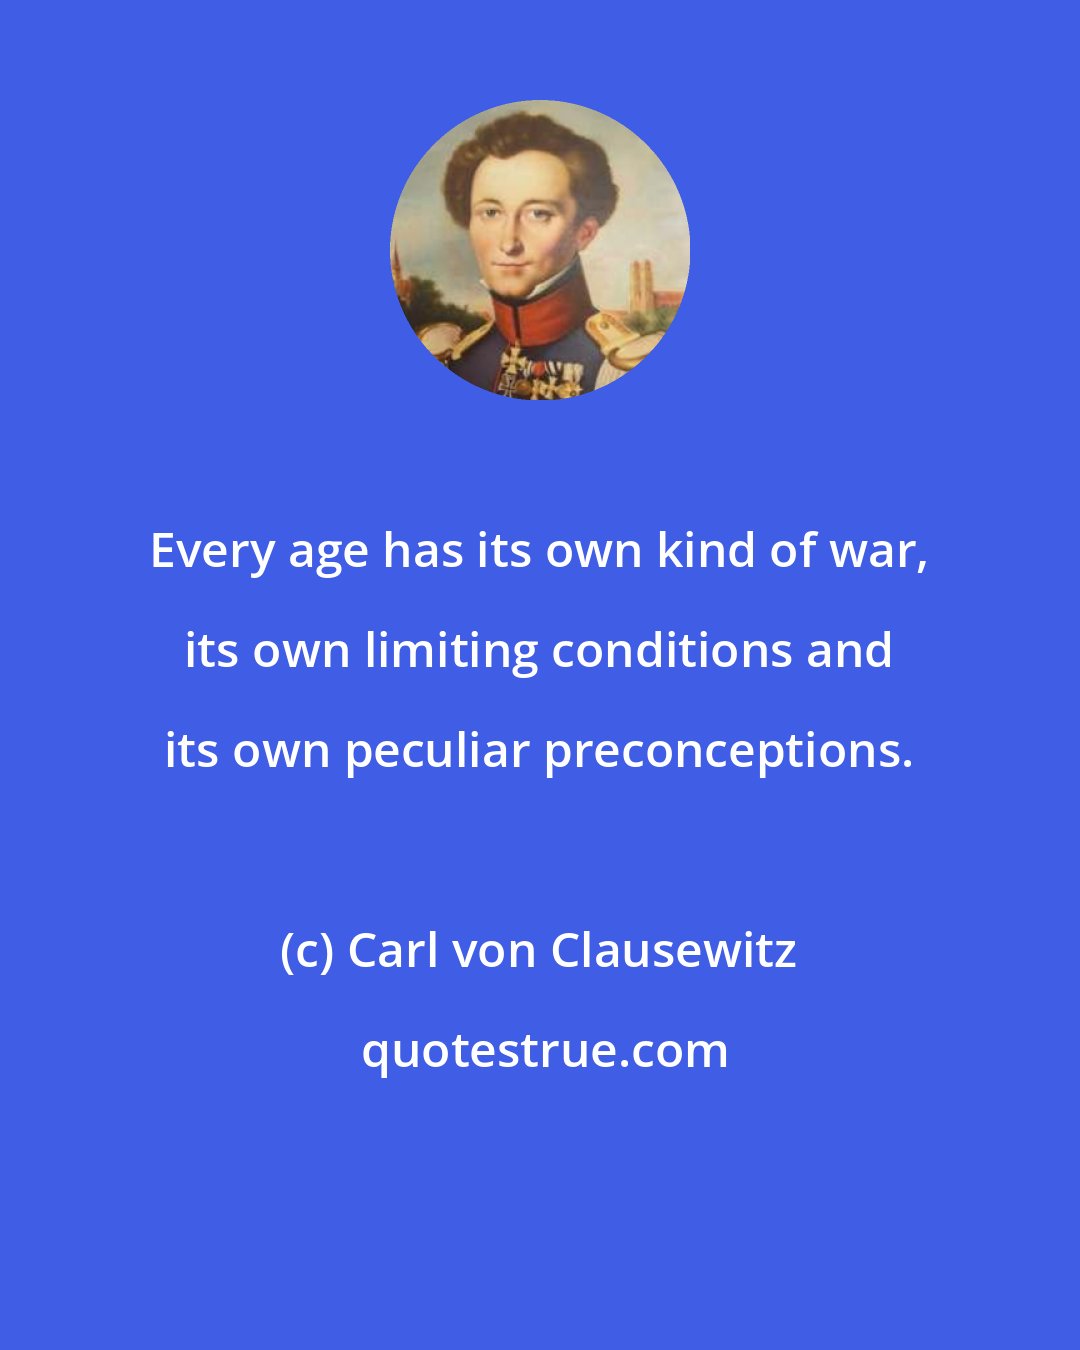 Carl von Clausewitz: Every age has its own kind of war, its own limiting conditions and its own peculiar preconceptions.